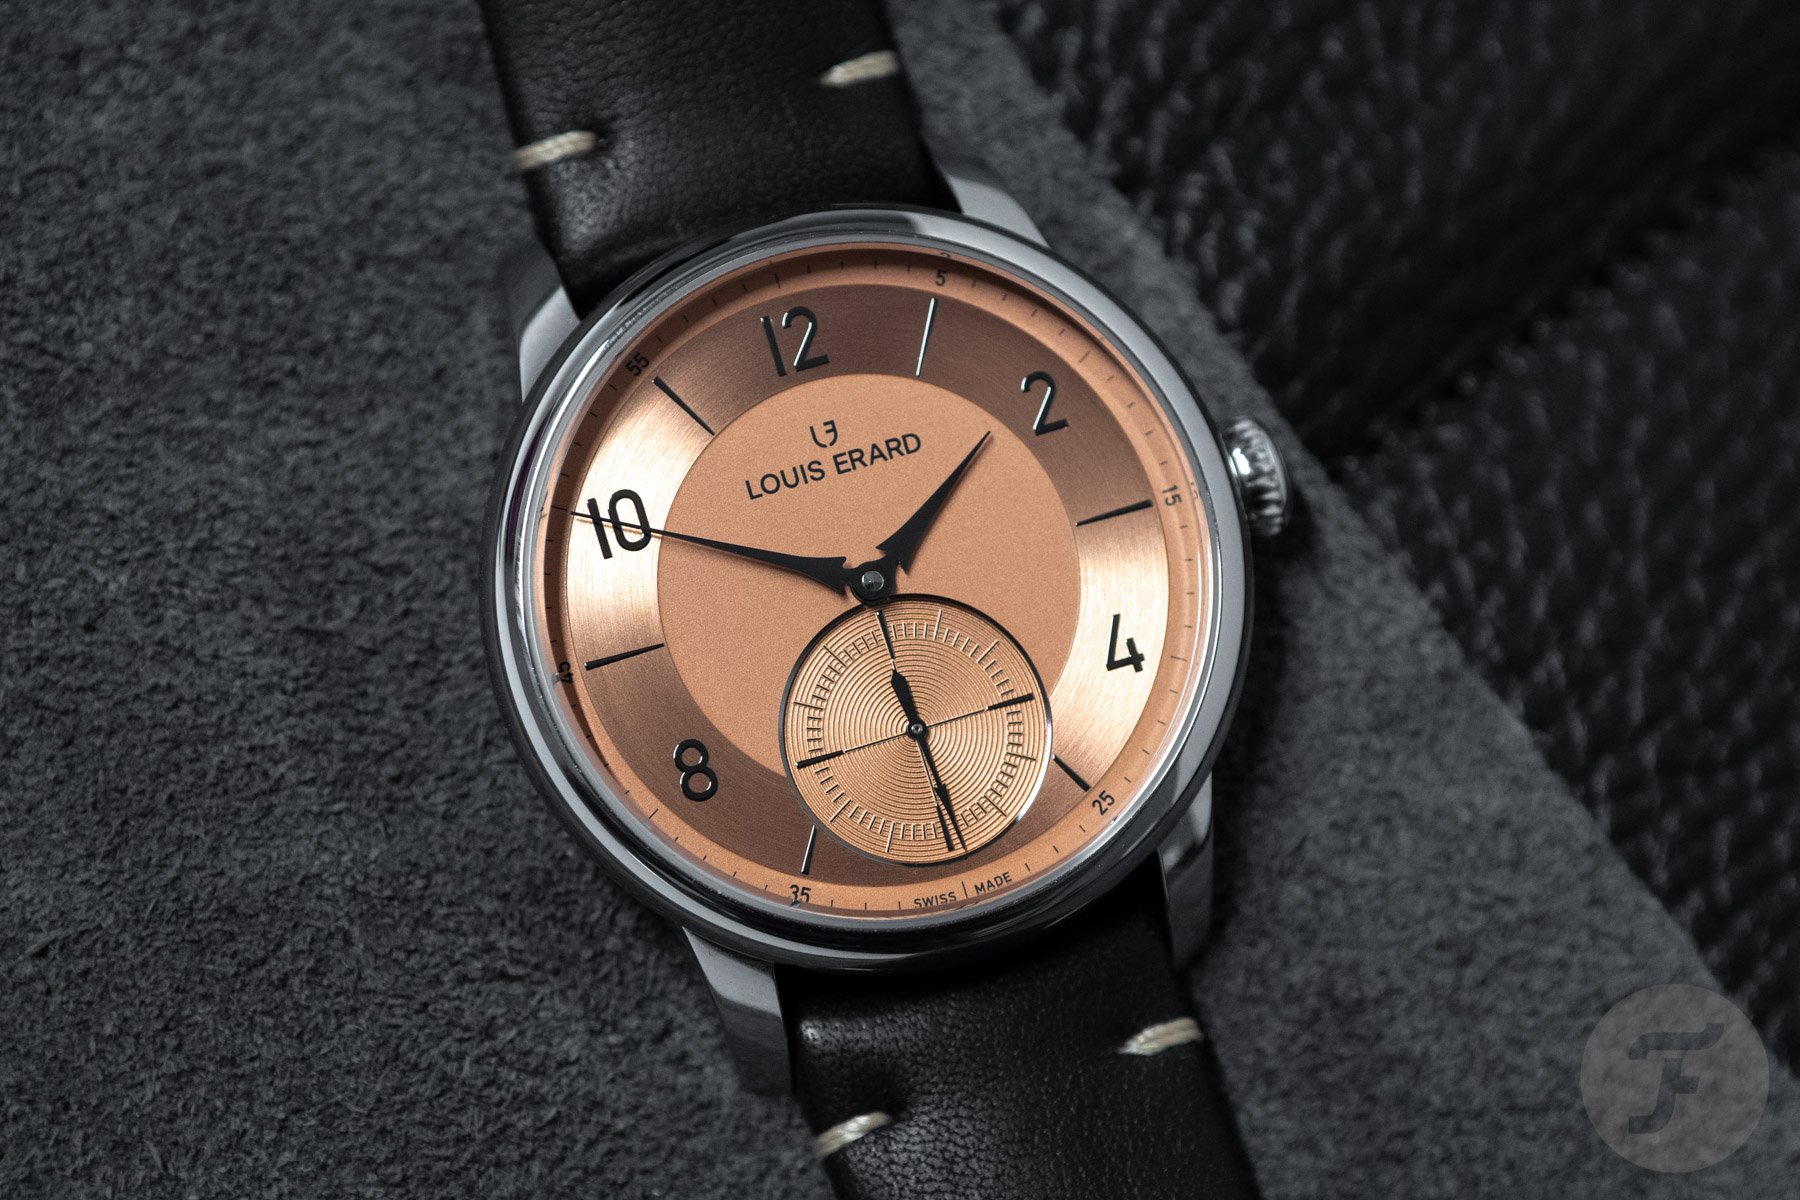 Louis Erard Excellence Petite Seconde Terracotta 39mm for $1,782 for sale  from a Private Seller on Chrono24